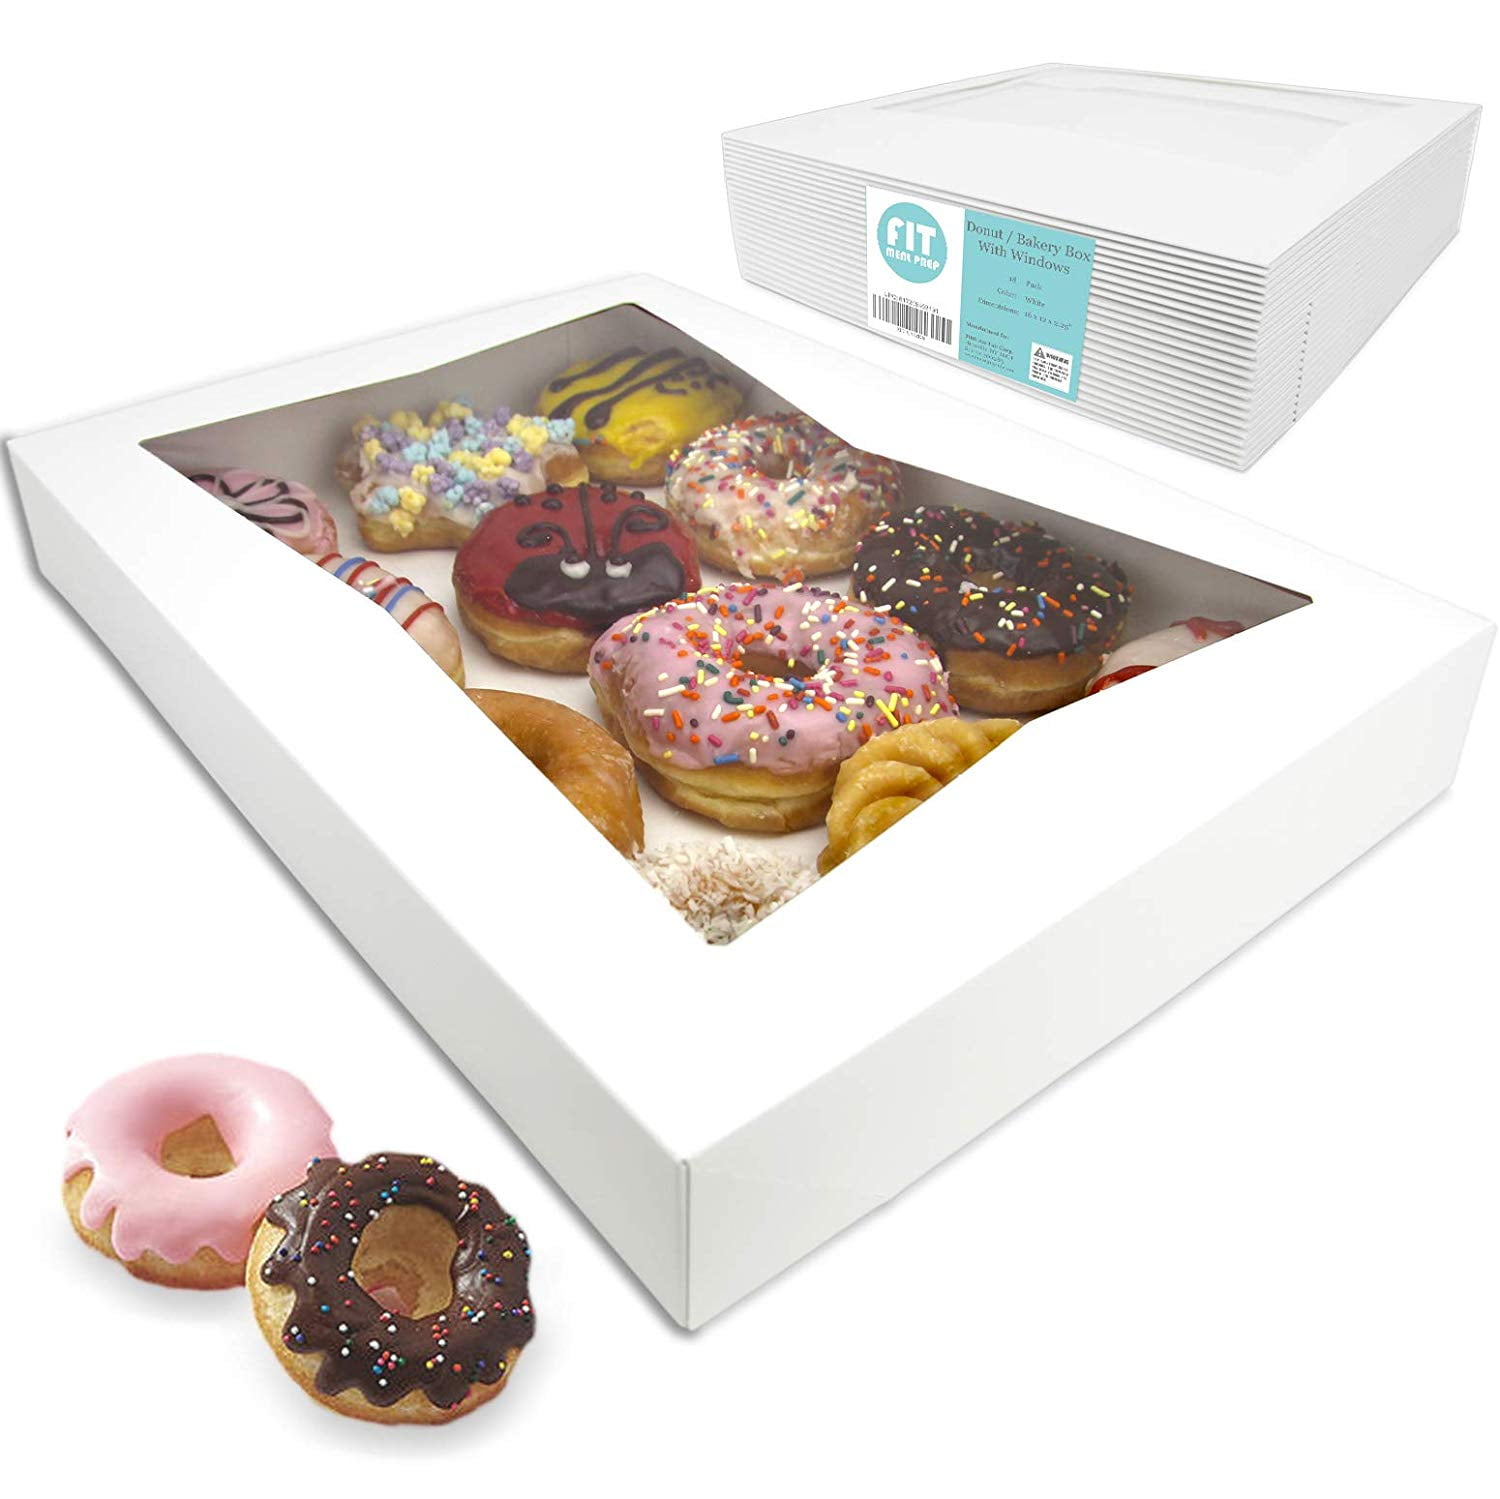 Keep Donuts Beautiful White Colored Paperboard Pastry Cookies Bakery Box Muffins Safe 25 Pieces Unique Auto Popup Feature and Clear Widow for Visibility Size 9 L X 9 W X 2 ½ H 